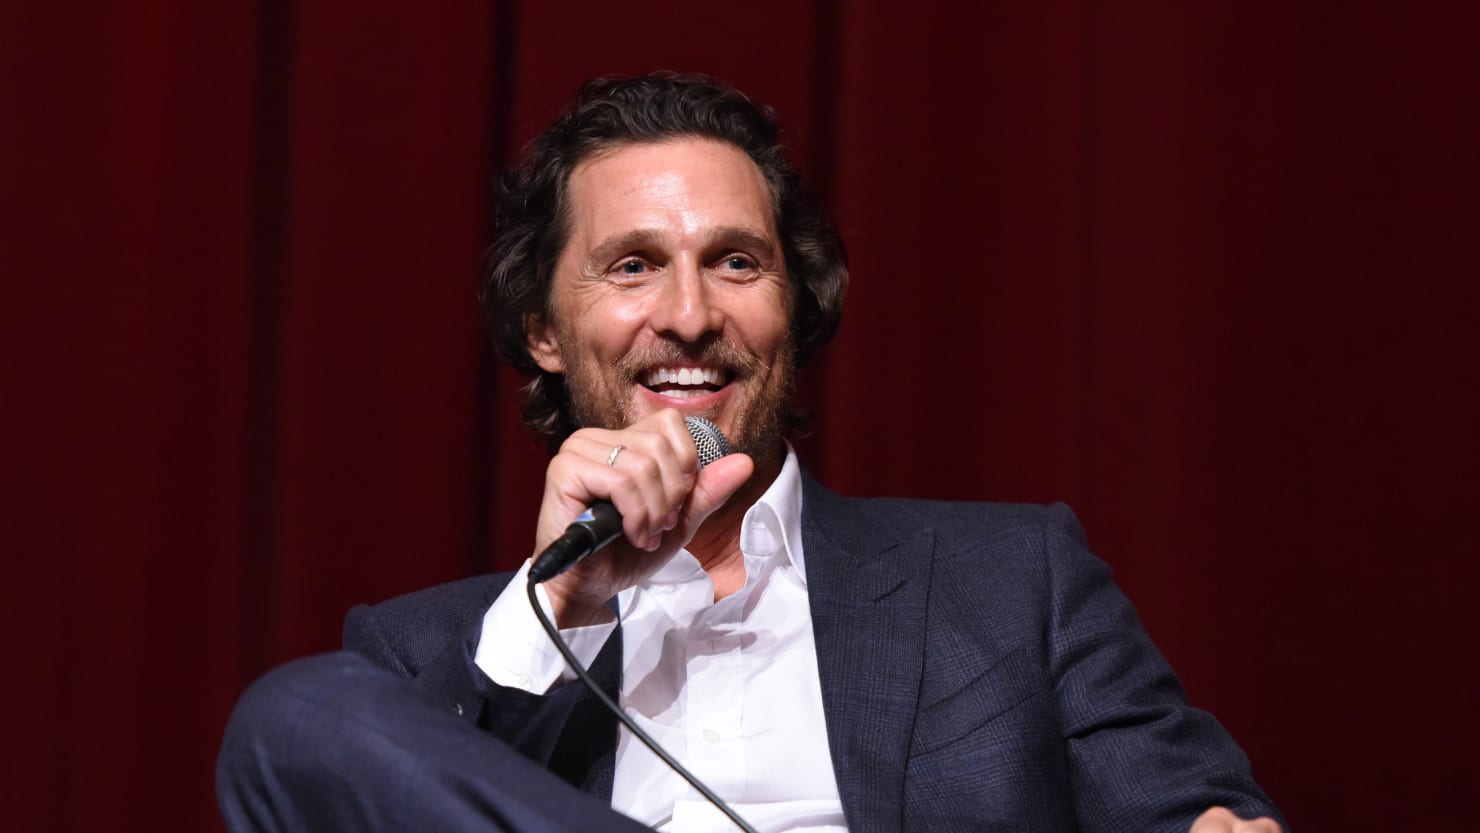 Actor Matthew McConaughey leads incumbent Greg Abbott in the election for Texas governor